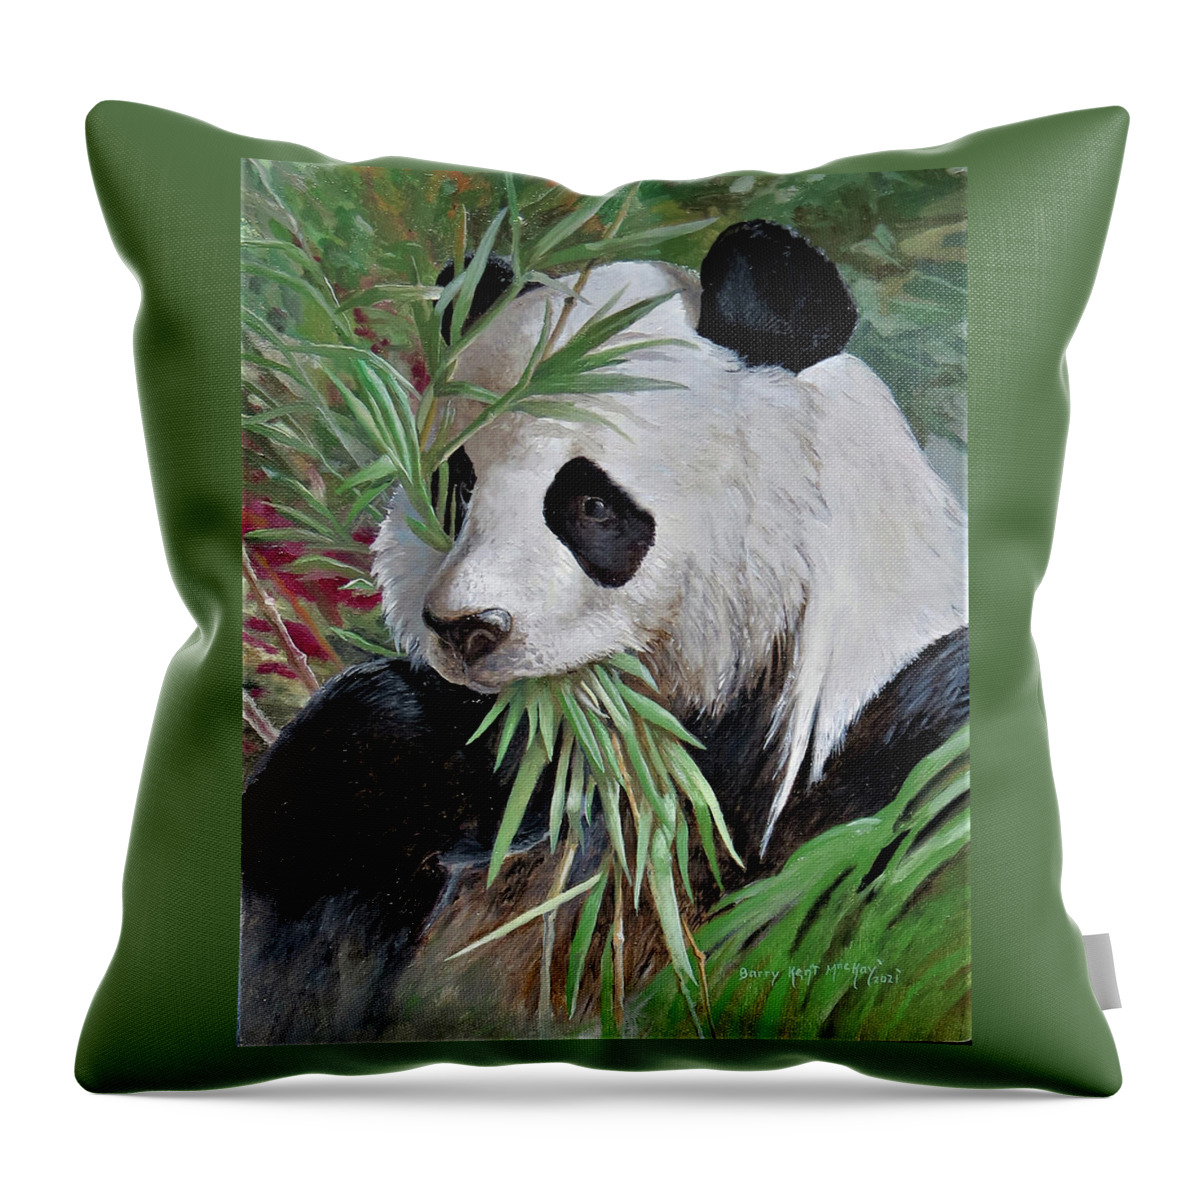 Giant Panda Throw Pillow featuring the painting Giant Panda Portrait by Barry Kent MacKay